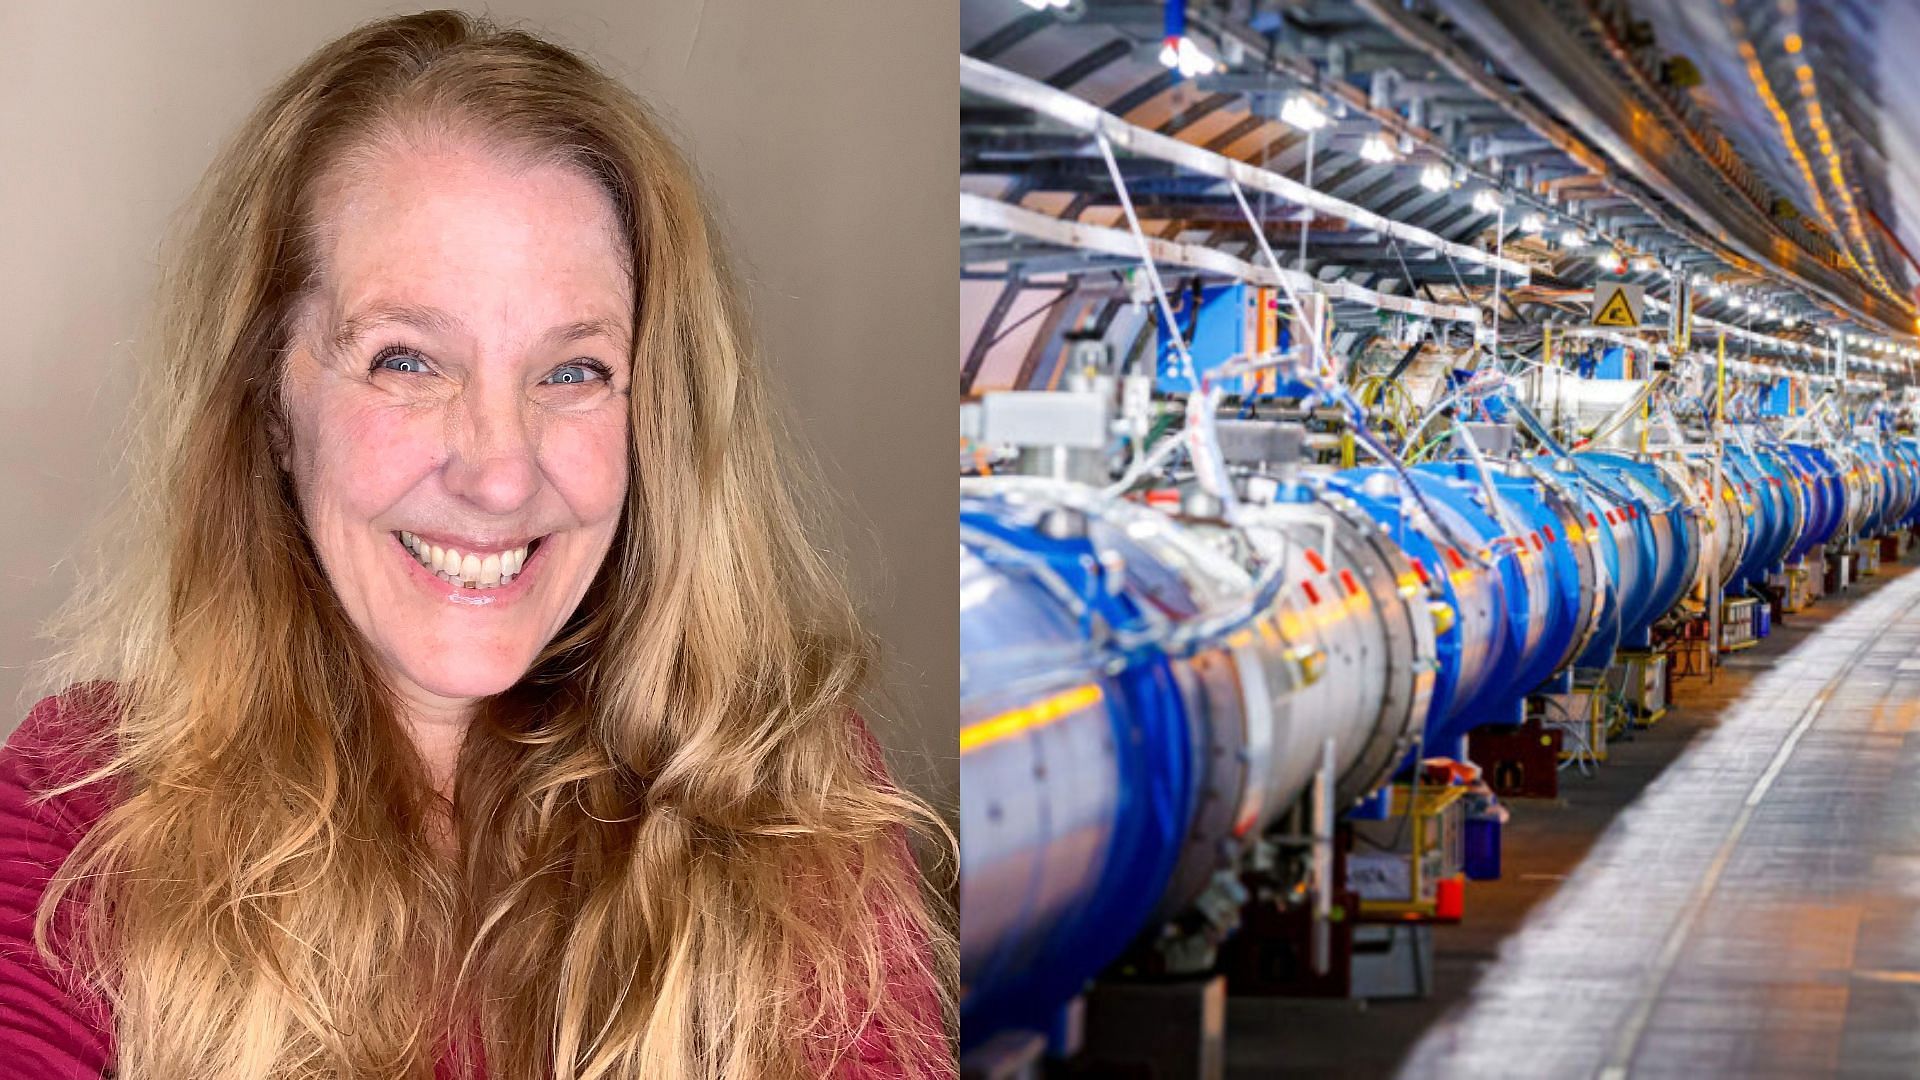 Cynthia Sue Larson (left) and CERN&#039;s Large Hadron Collider (right). (Image via Twitter/cynthialarson and Getty/ValentinFlauraud)